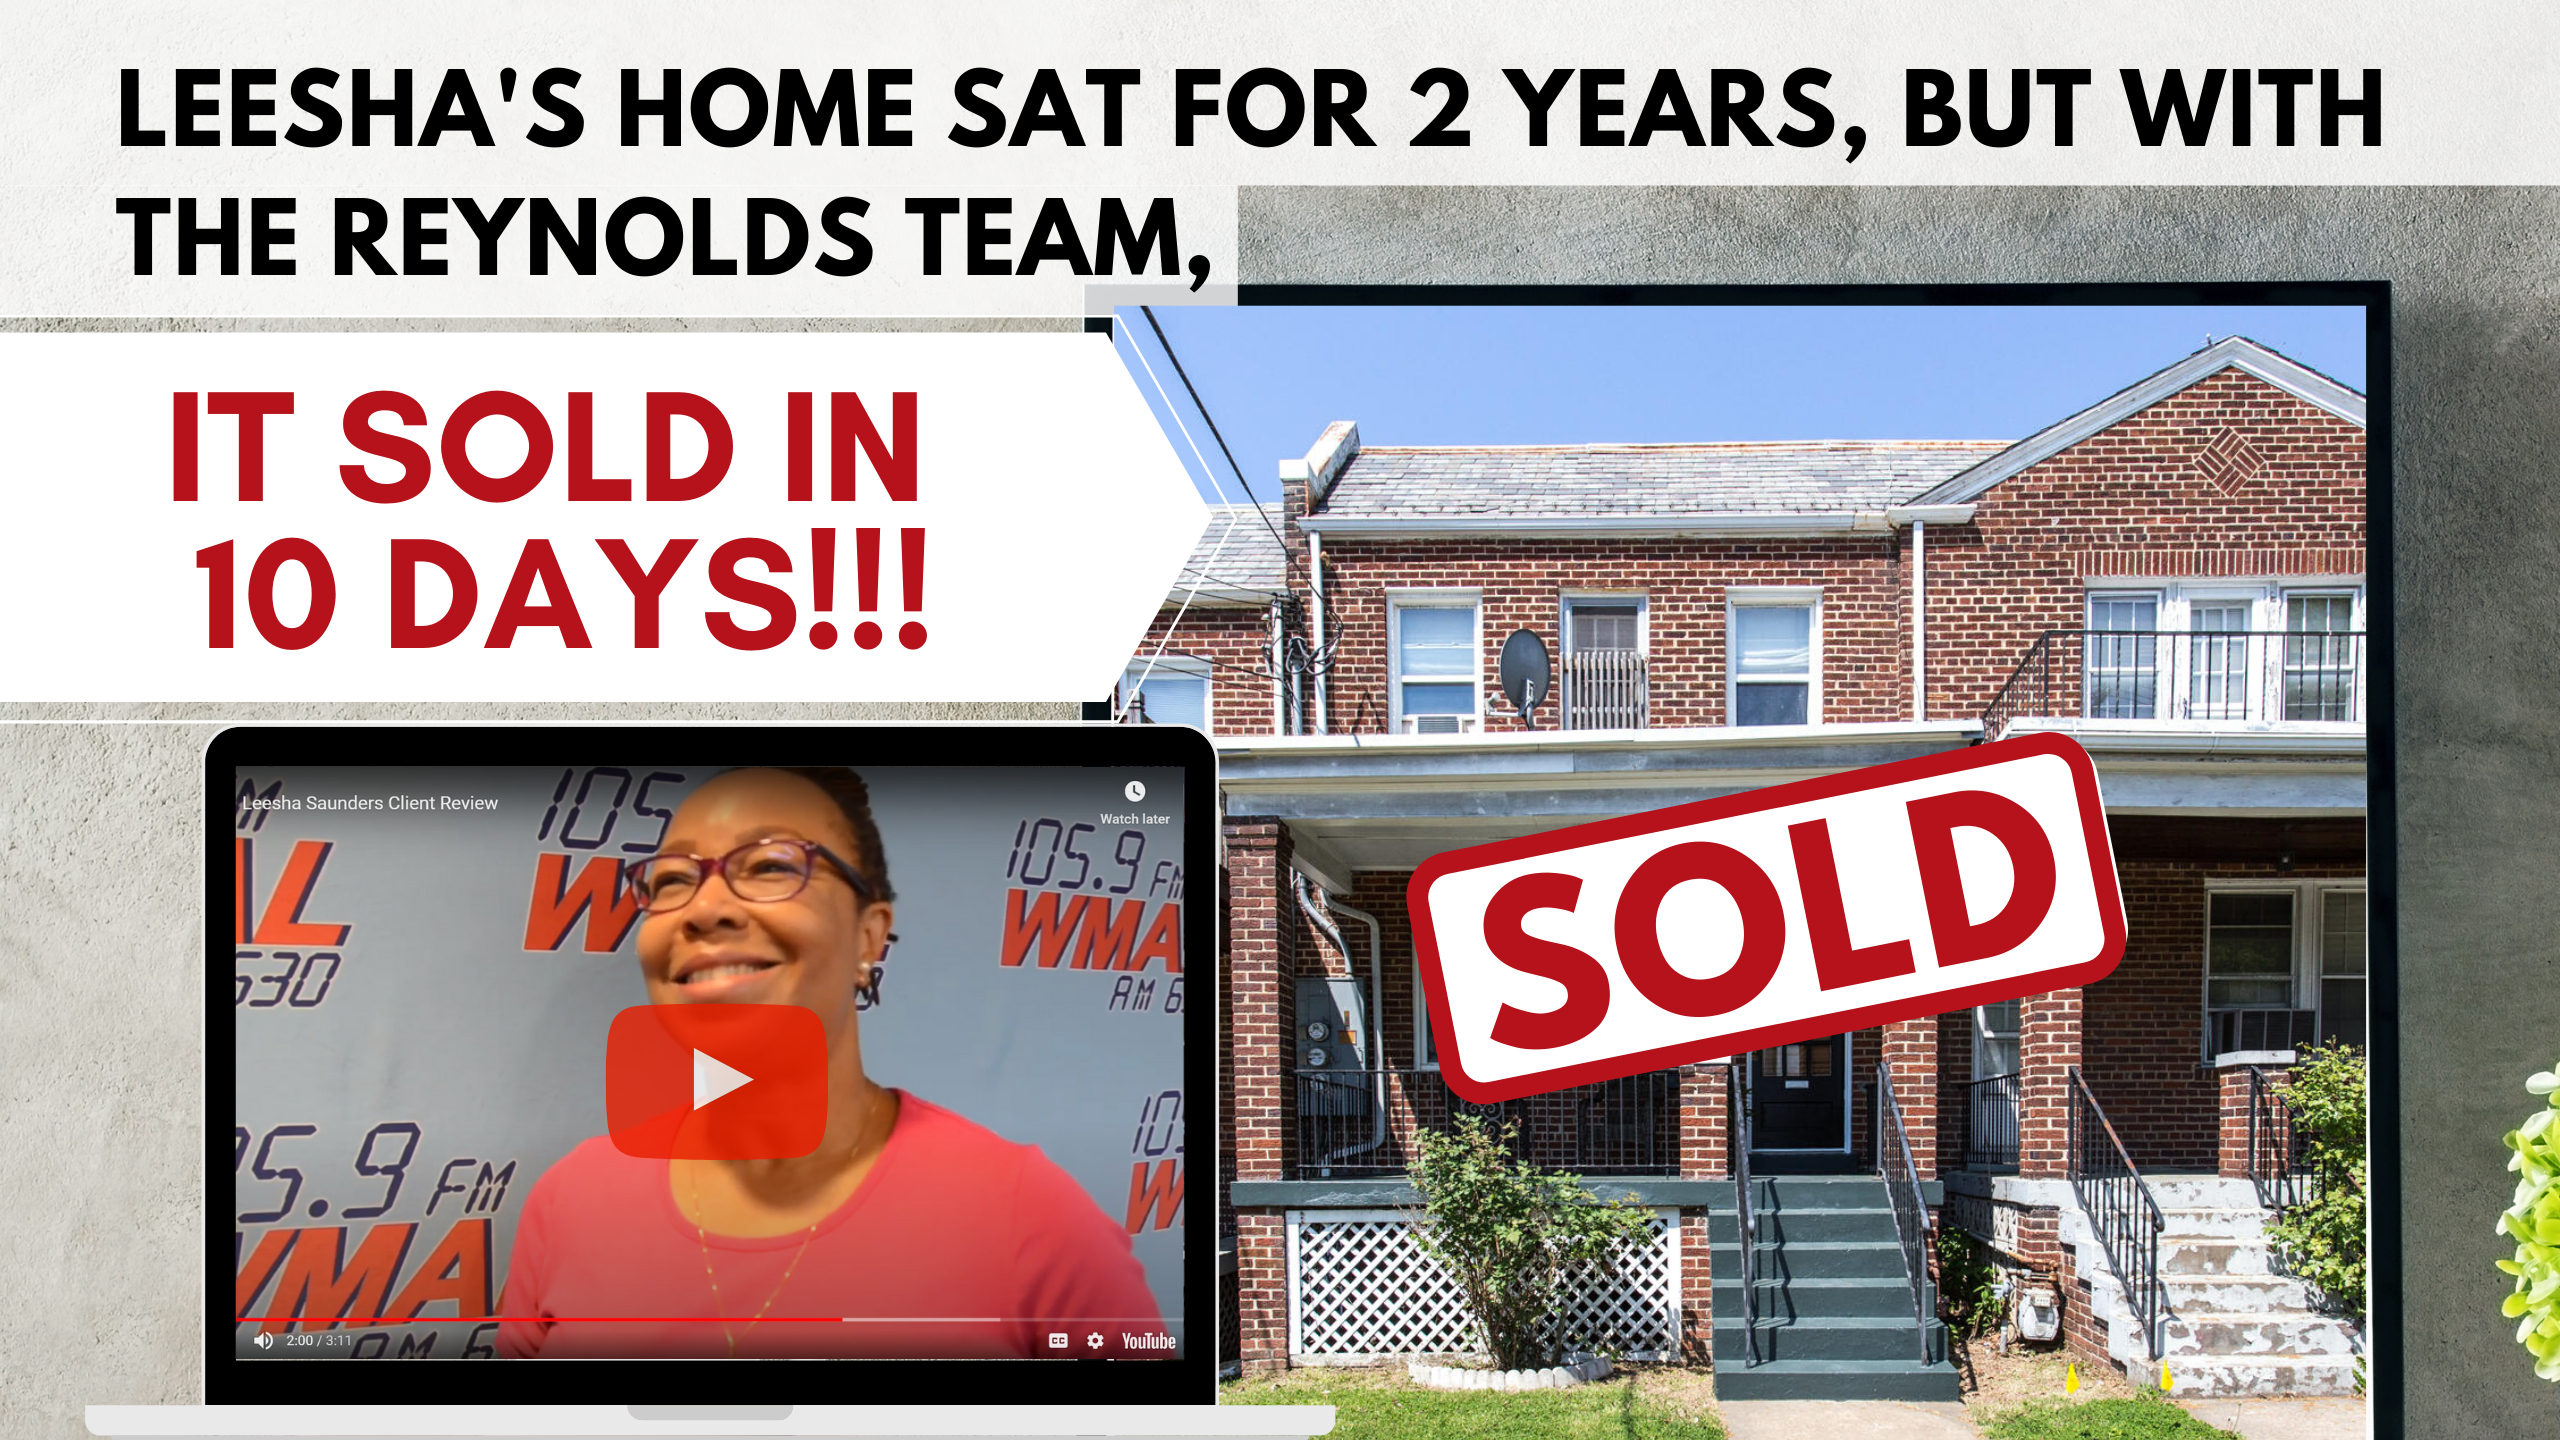 Leesha’s Home Sat For 2 Years, But With The Reynolds Team, It SOLD In 10 DAYS!!!